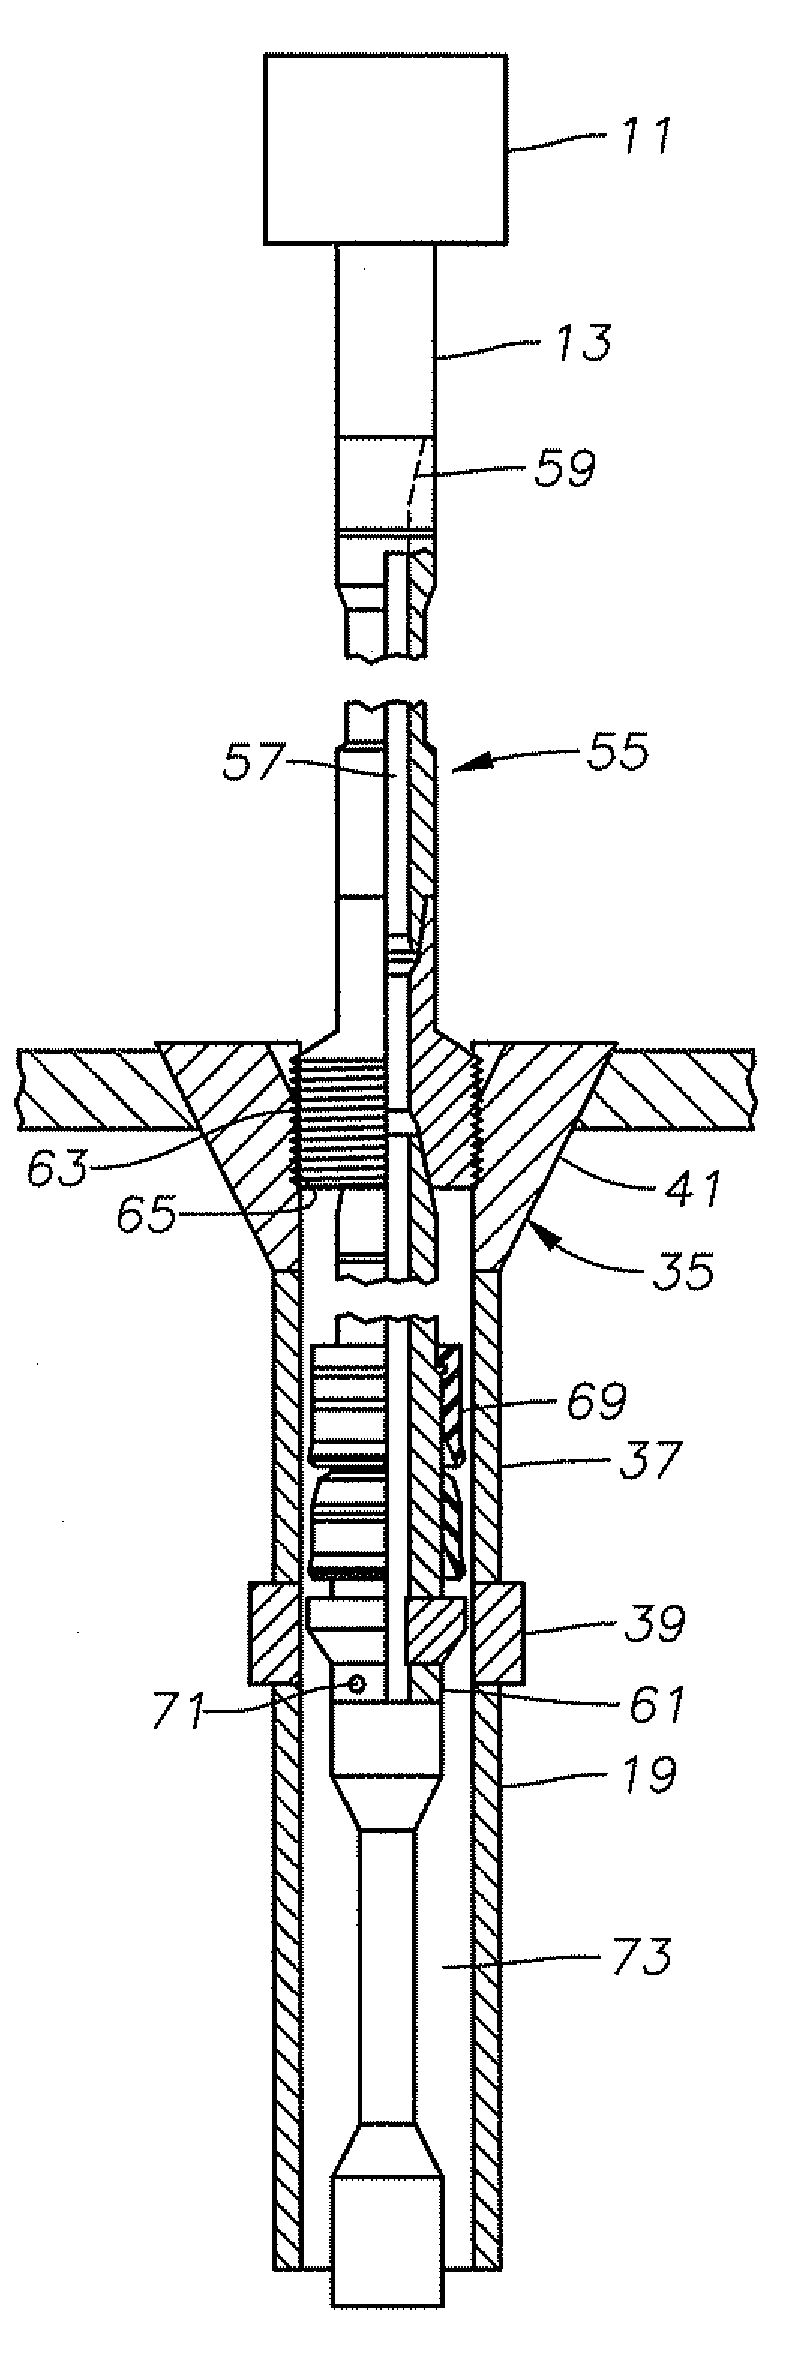 Method of circulating while retrieving downhole tool in casing